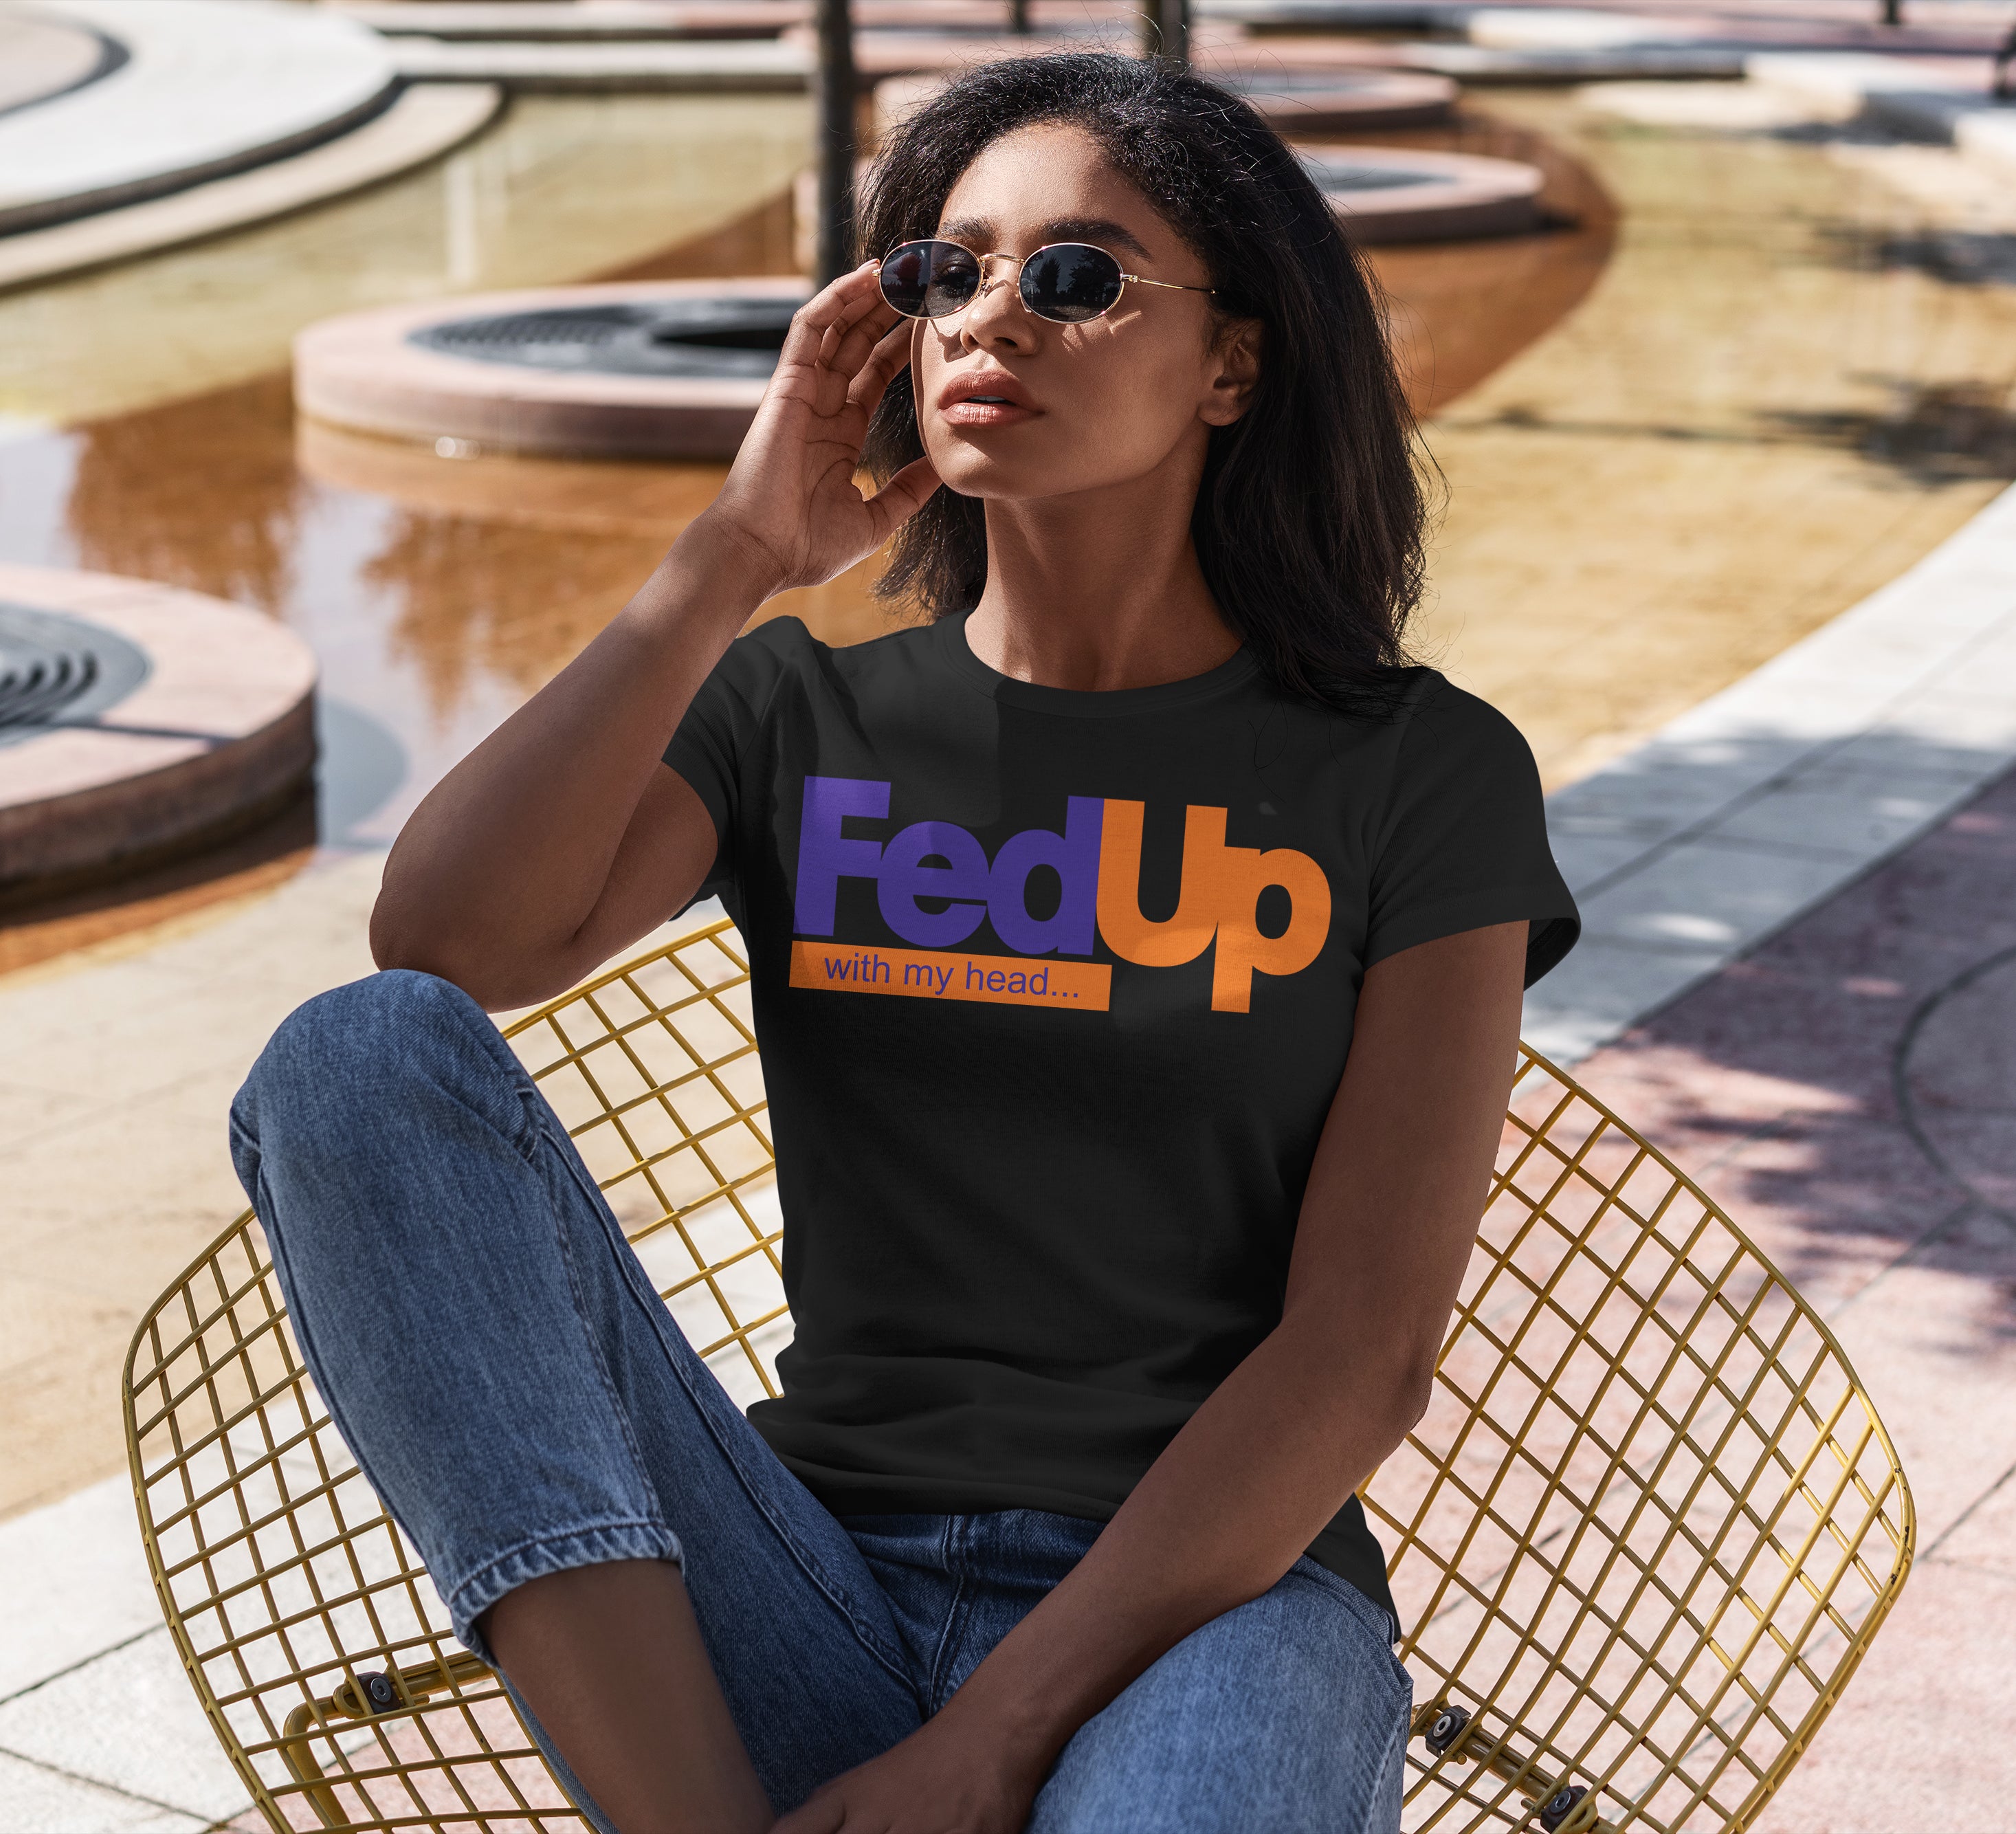 FedUp with my head Up T-Shirt